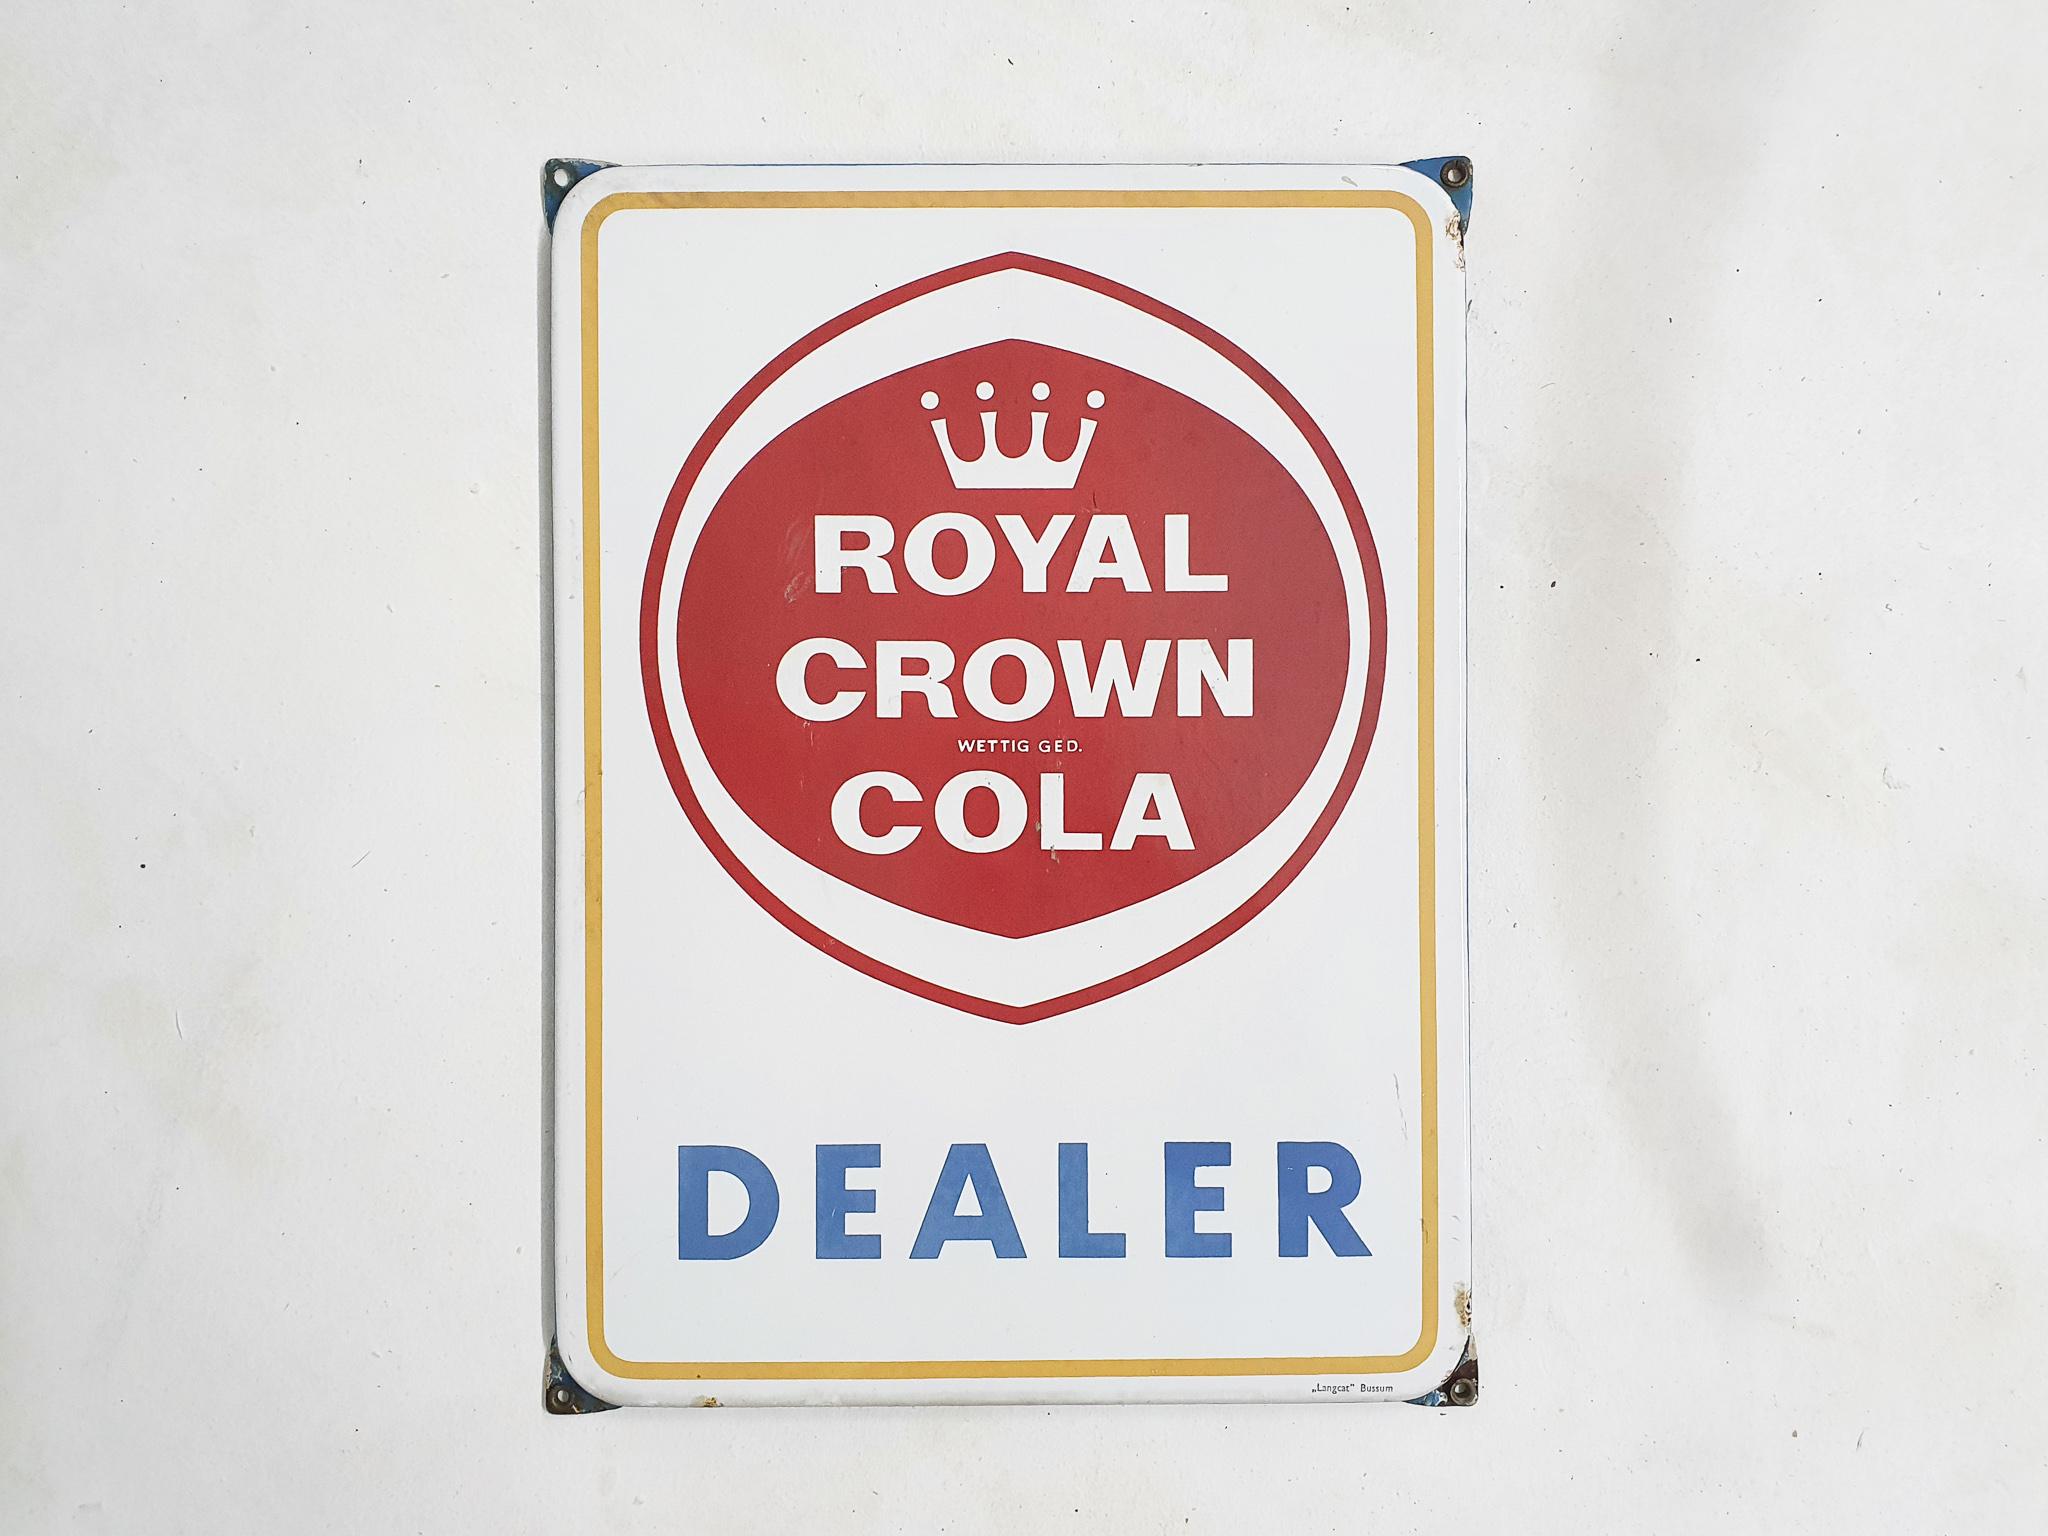 Enamelled advertisement sign for Royal Crown Cola. Made by Langcat Bussum the Netherlands in the 1950's.

Langcat Bussum was probably the most famous manufacturer of enamelled signs in mid-century. The Dutch based company designed and made many